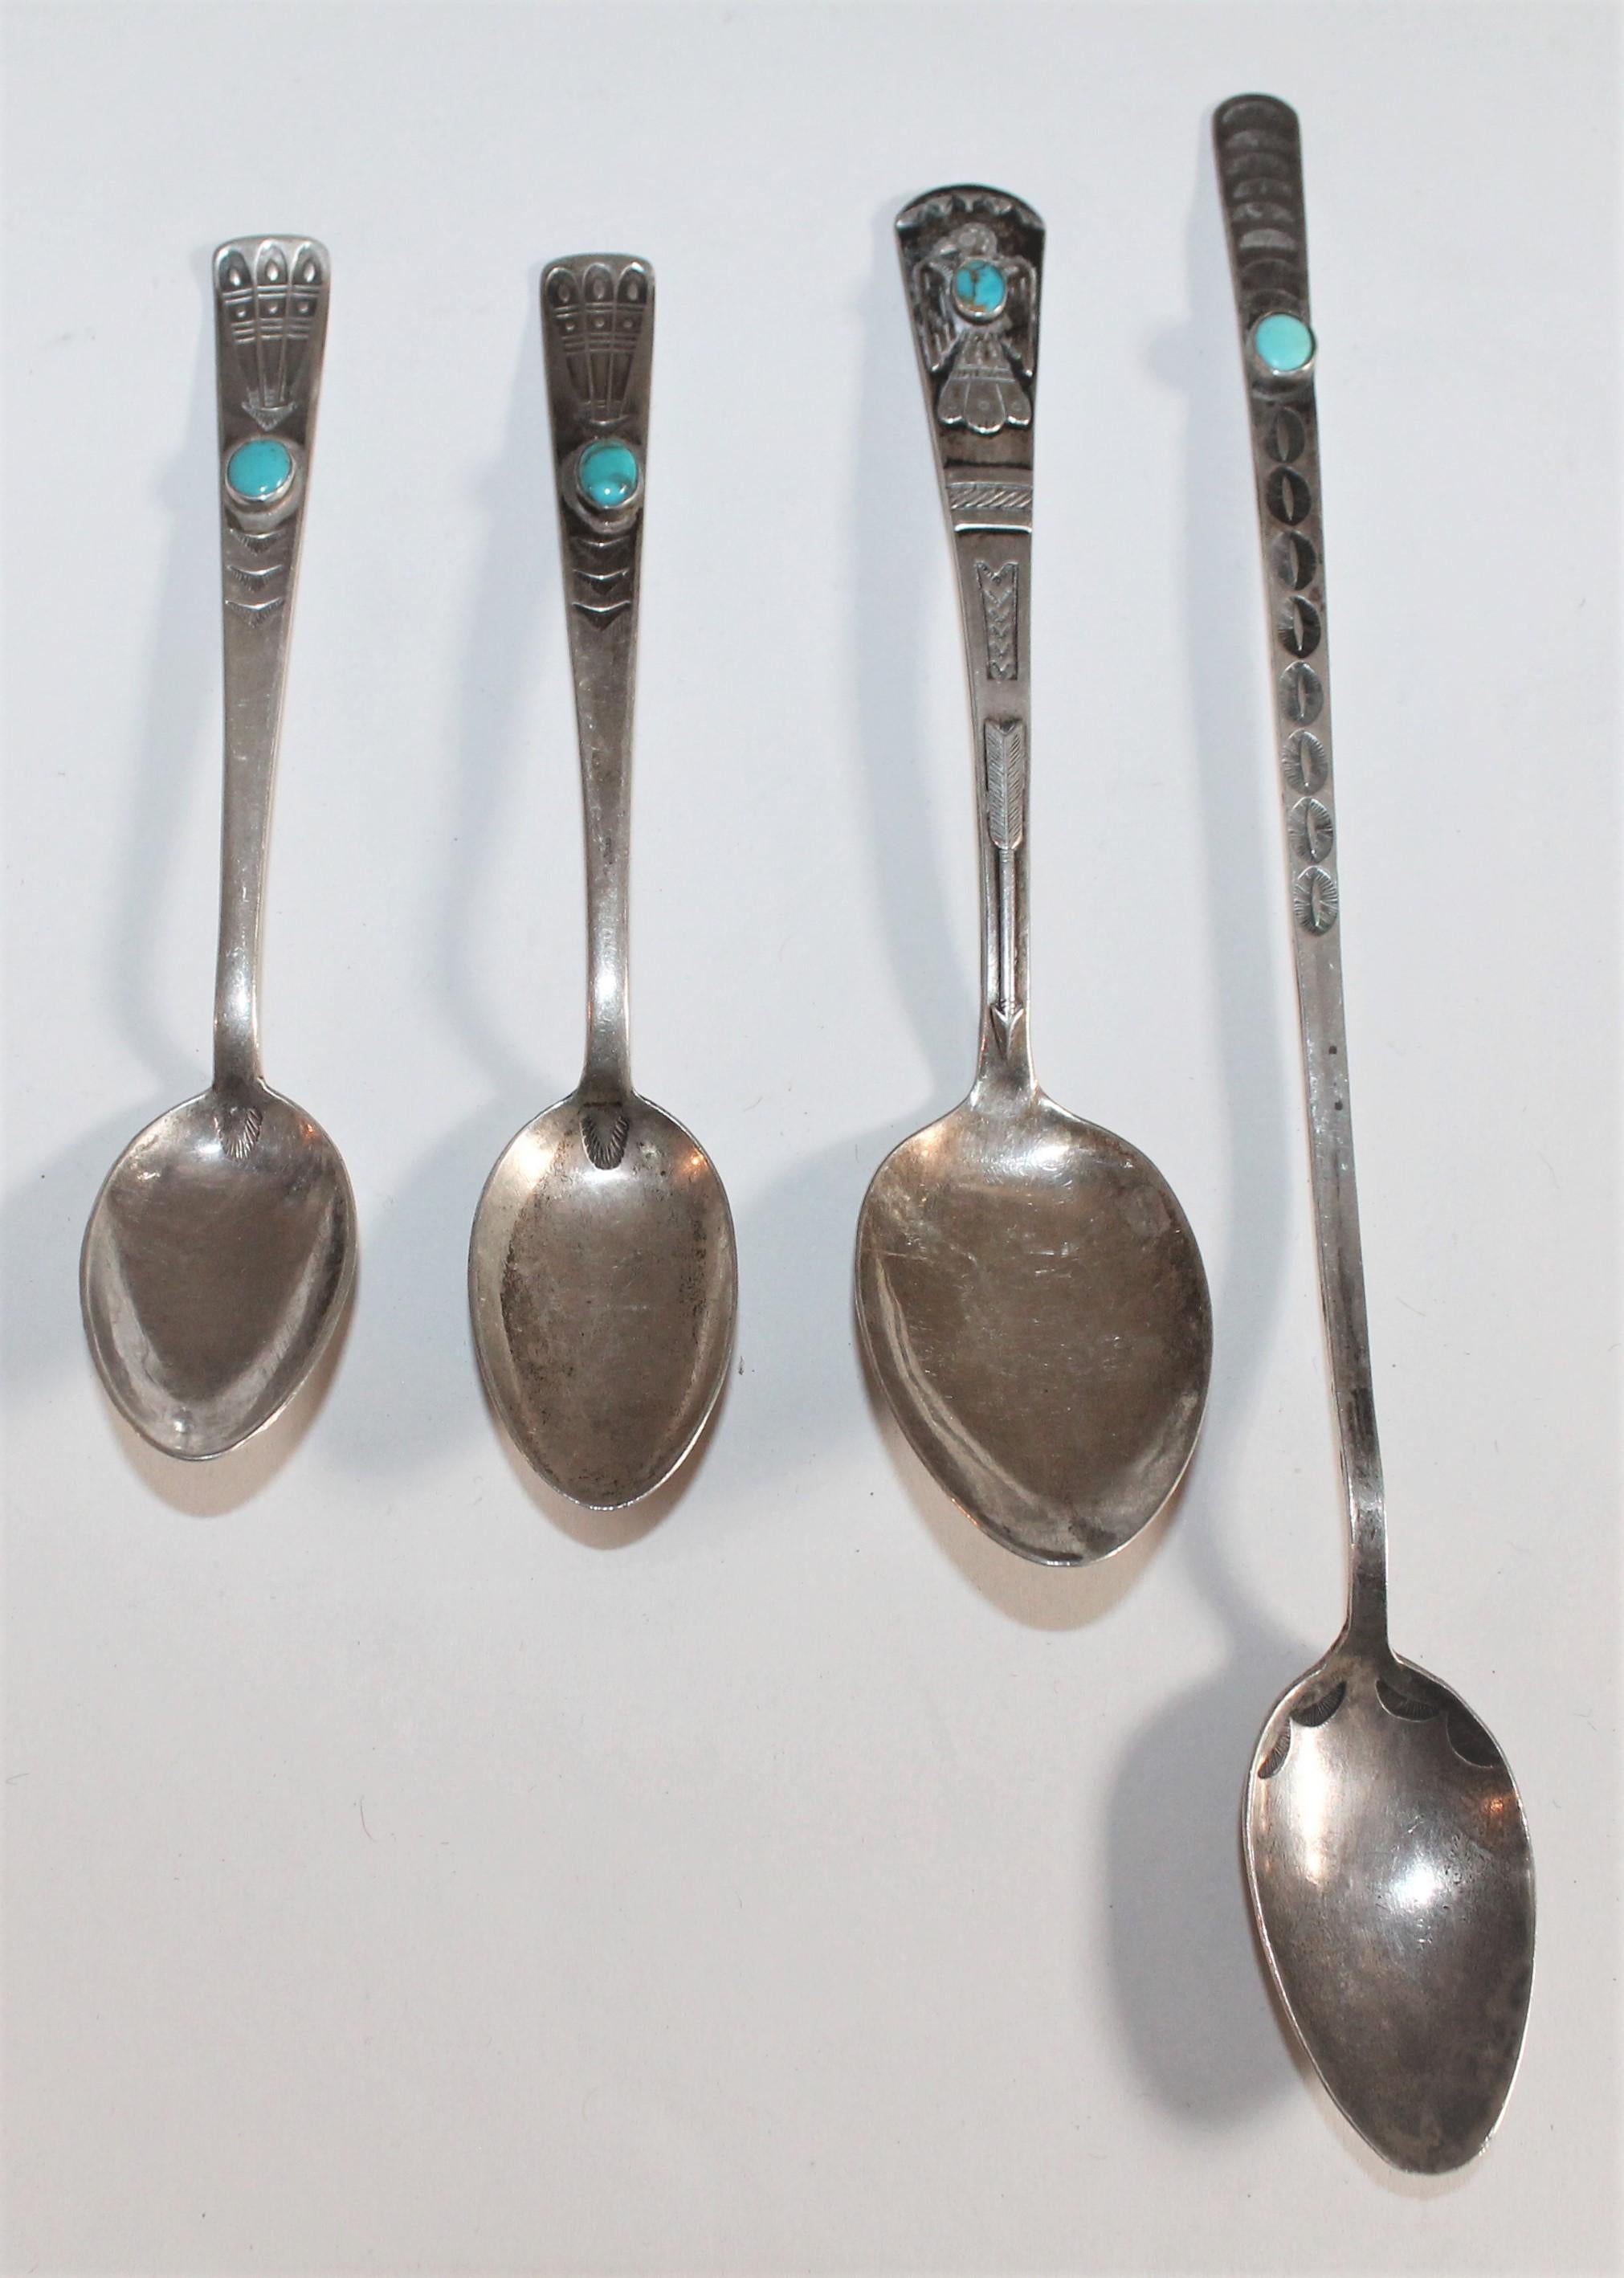 Collection of Navajo sterling spoons with turquoise. These great spoons are Navajo and have a beautiful Navajo pattern to them with great patina consistent of age and use.

Largest spoon measures - 8 x 1 x .25
Medium spoon measures - 5.75 x 1.25